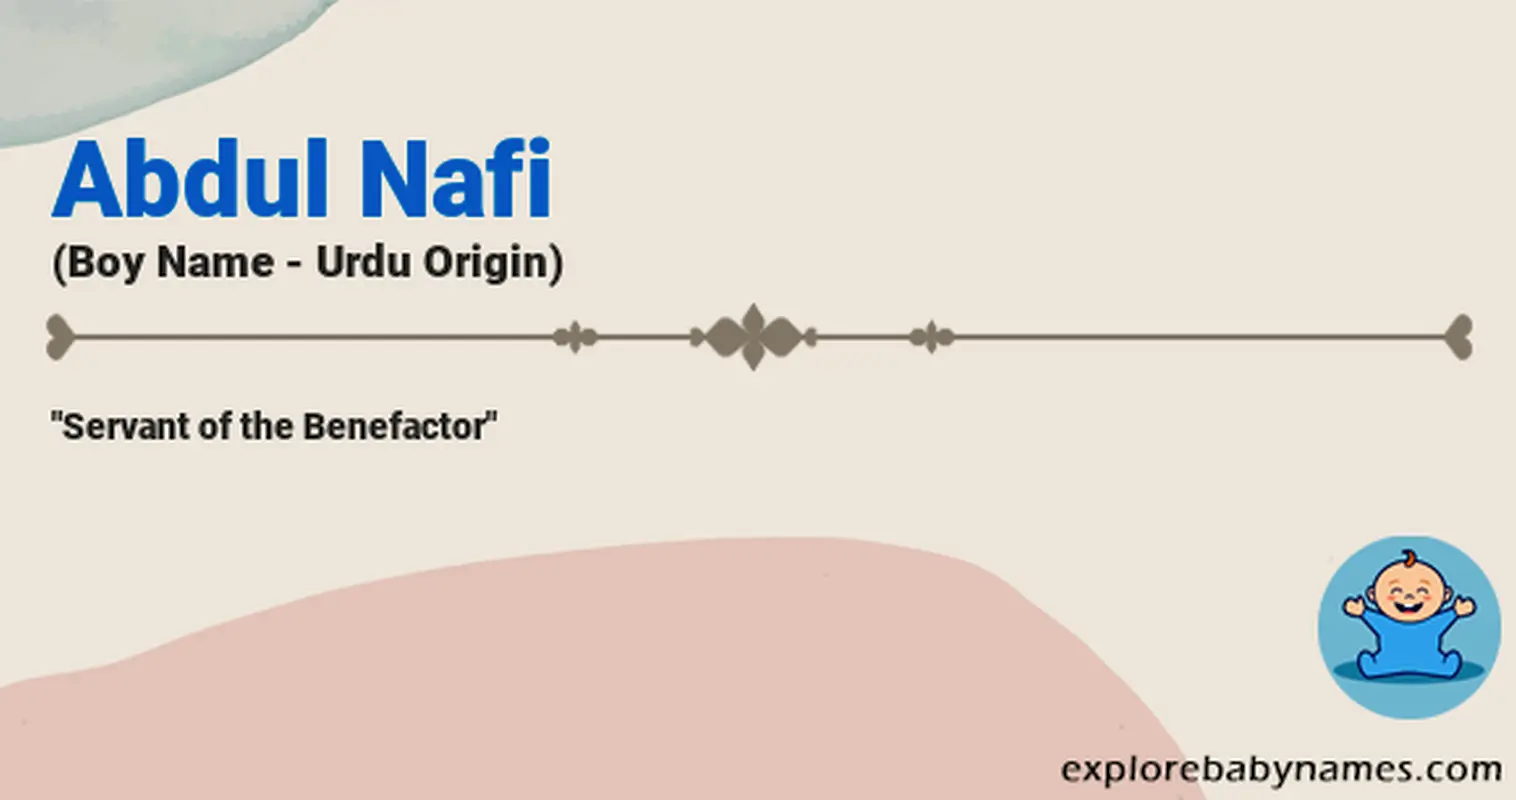 Meaning of Abdul Nafi